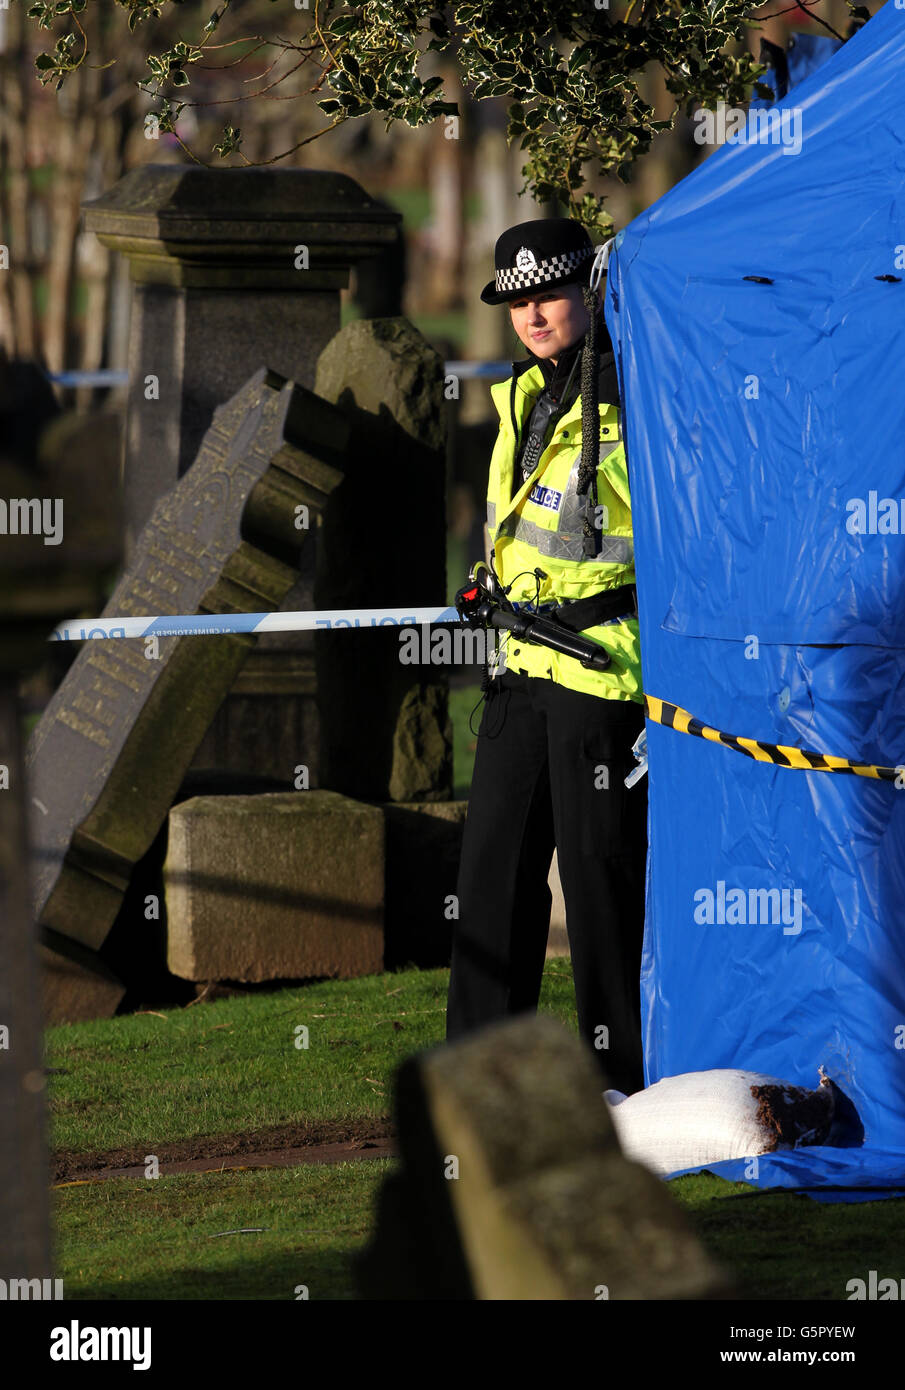 A police woman stands guard at the gravesite at Old Monkland Cemetery in Coatbridge, Scotland where police have started an exhumation of a gravesite in the search for the remains of a schoolgirl Moira Anderson. Stock Photo